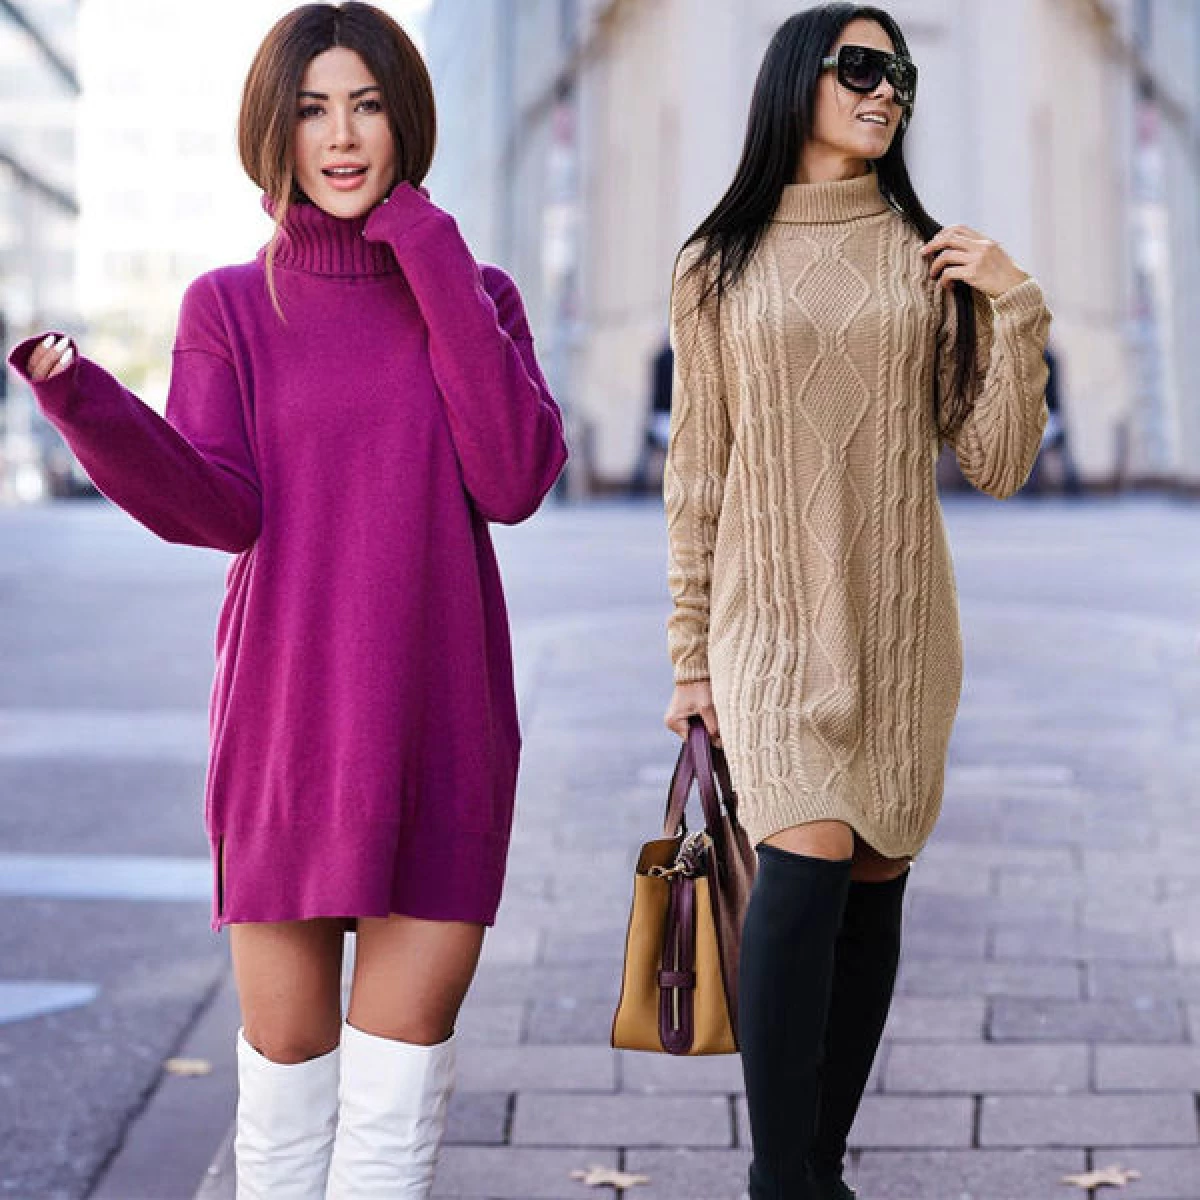 How to look slimmer in a sweater 23765_15